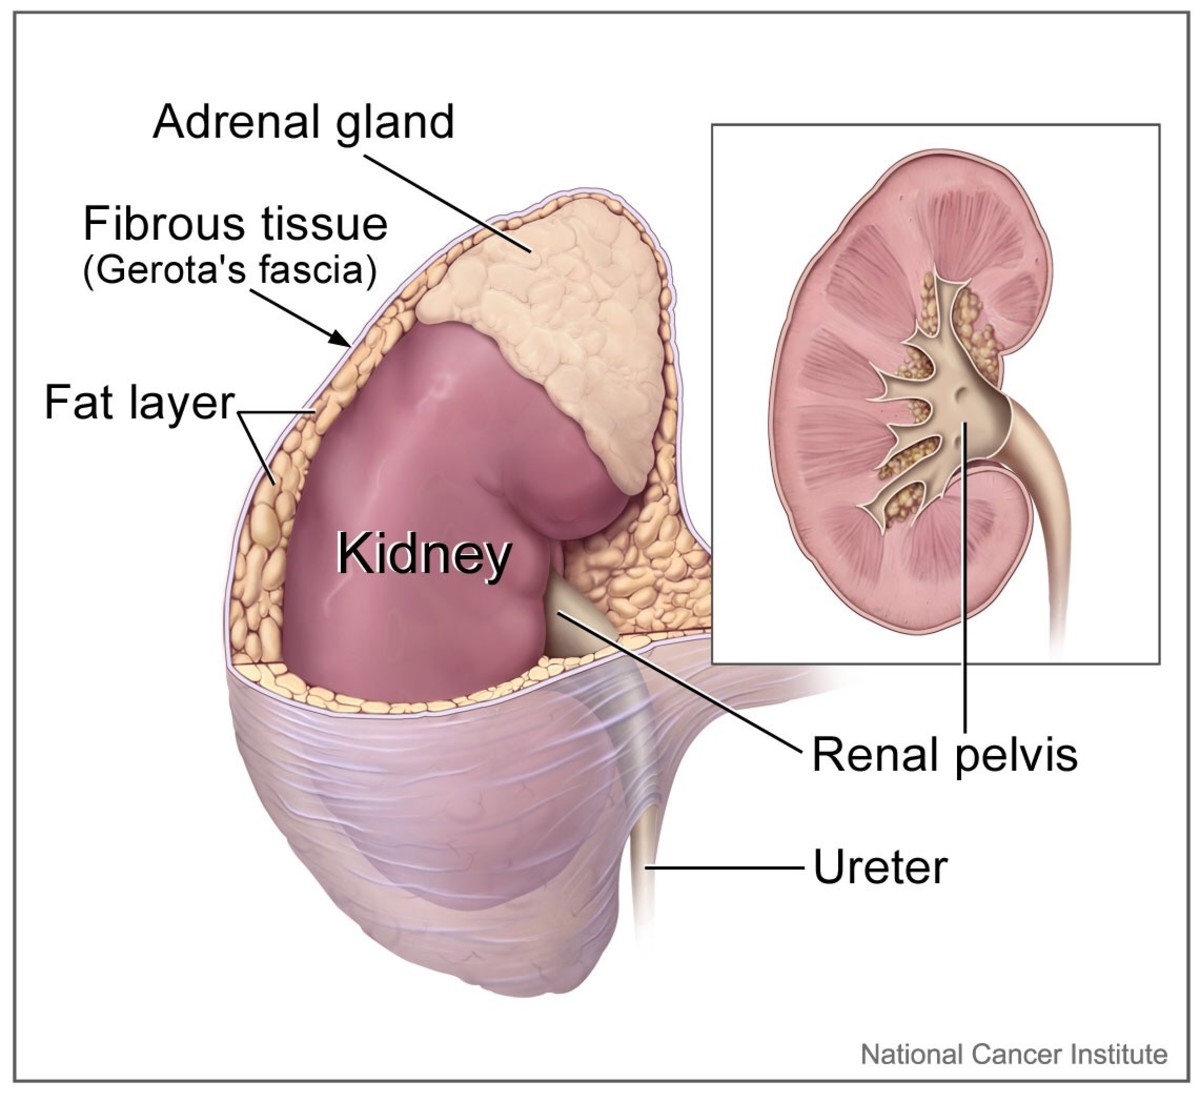 The adrenal gland is located on top of the kidney. Both organs are surrounded by a fat layer and a fibrous capsule. We have two kidneys and two adrenal glands.